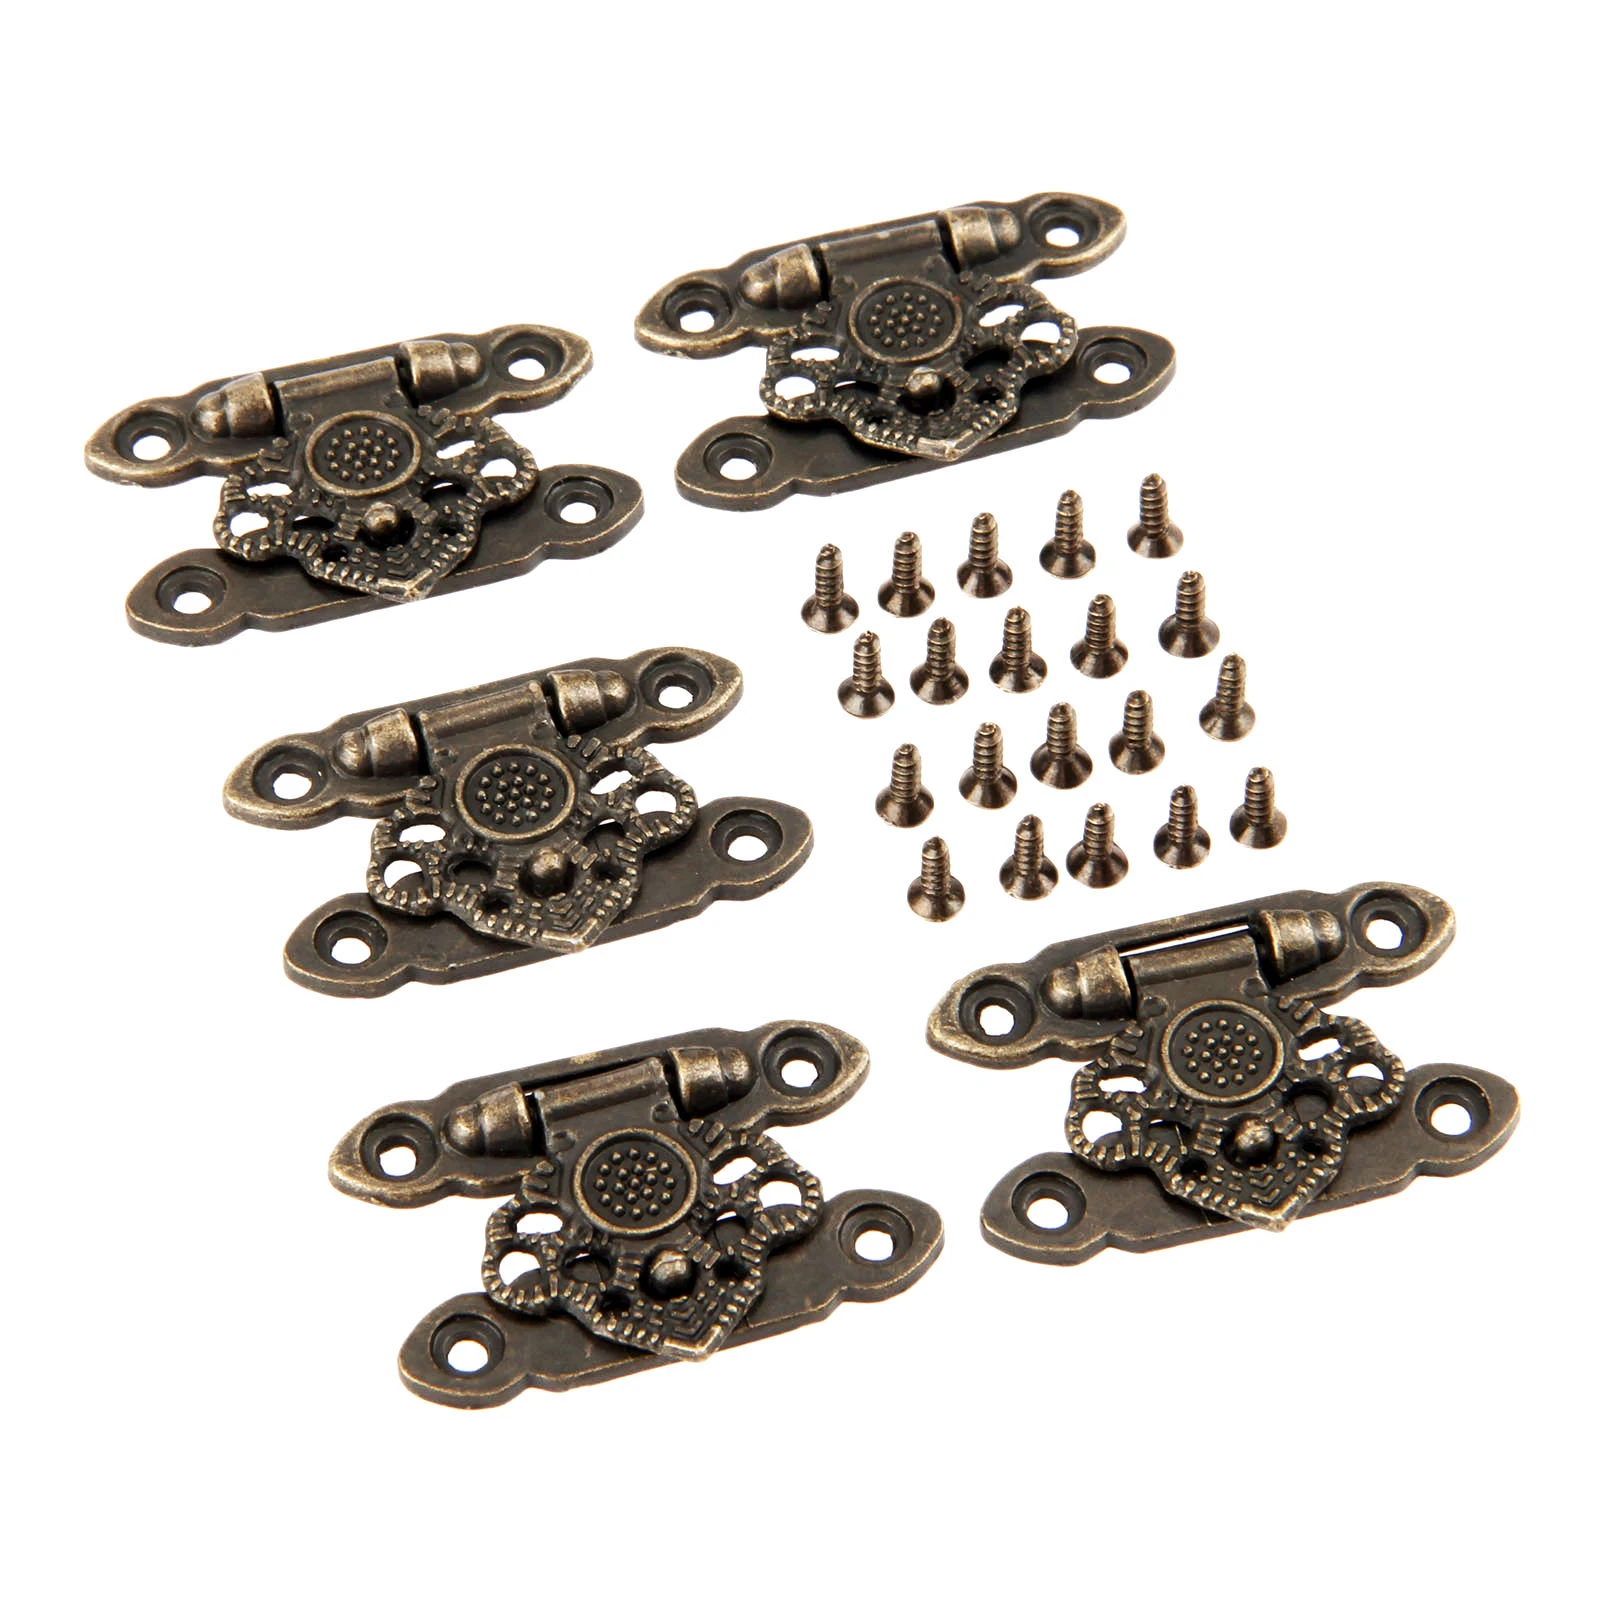 DRELD 5Pcs Antique Bronze Alloy Latch Hardware Decorative Jewelry Gift Wooden Box Suitcase Hasp Latch Hook With Screws 37*25MM